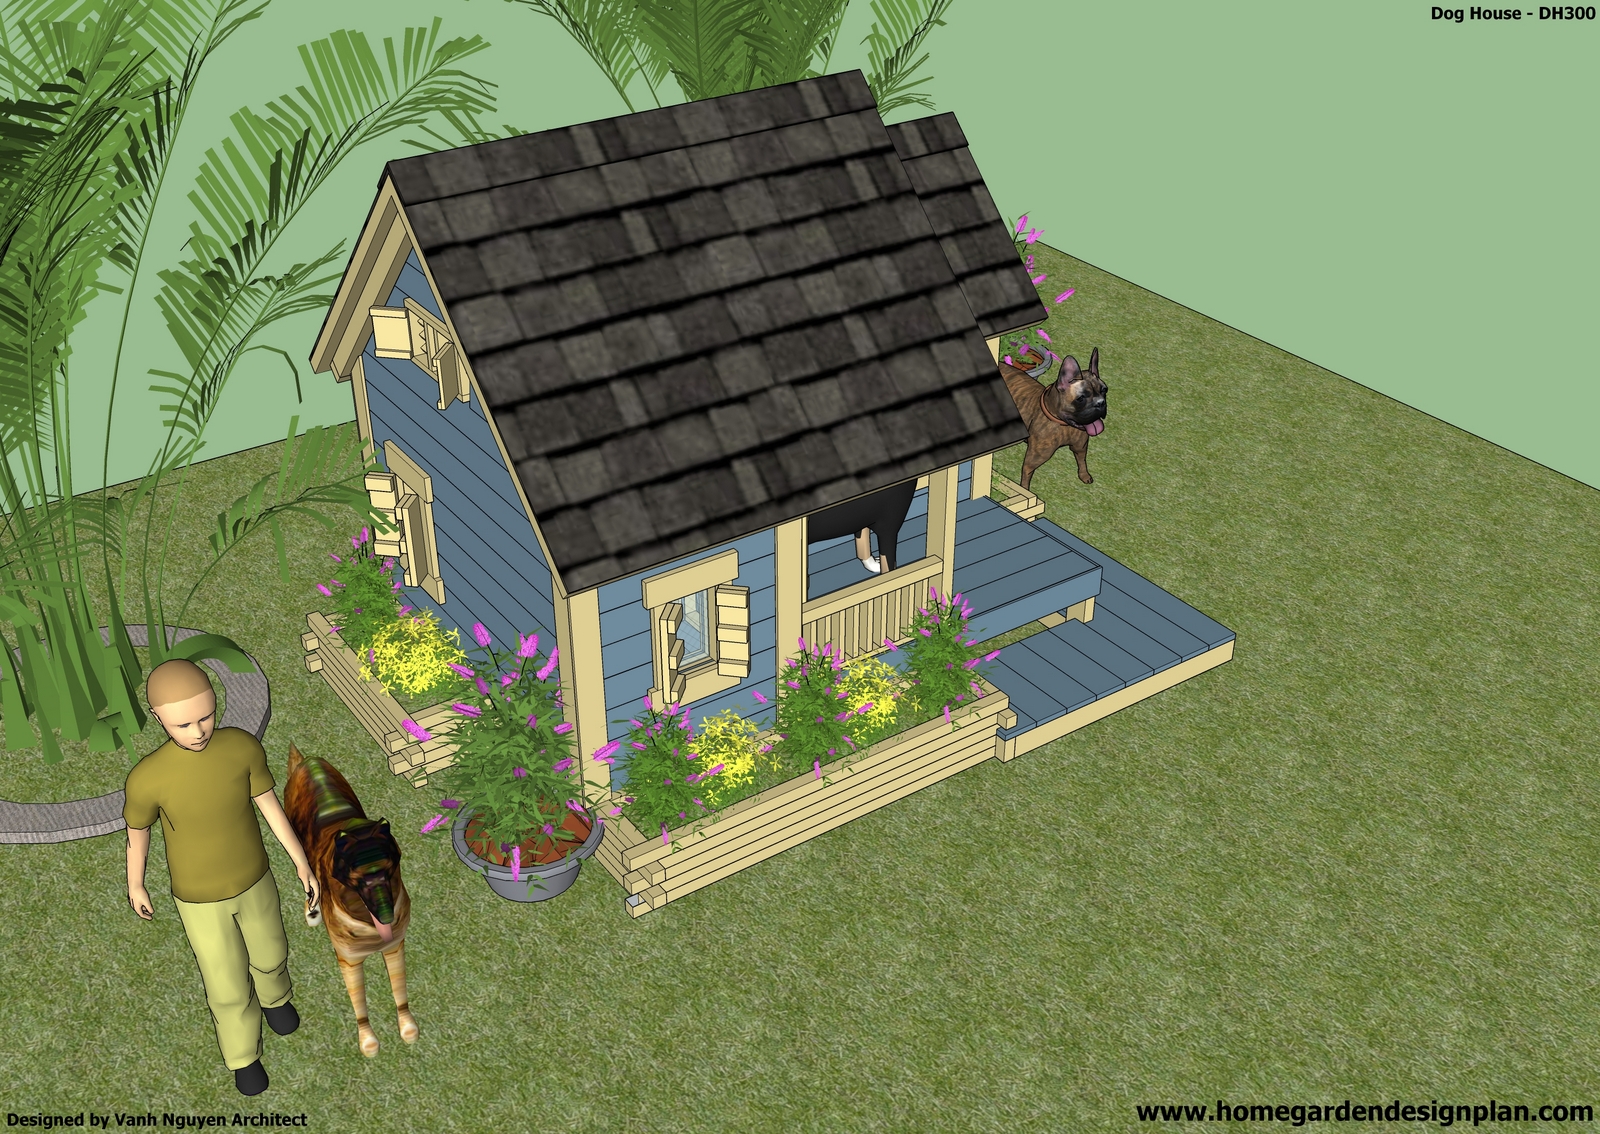 plans for wood dog house